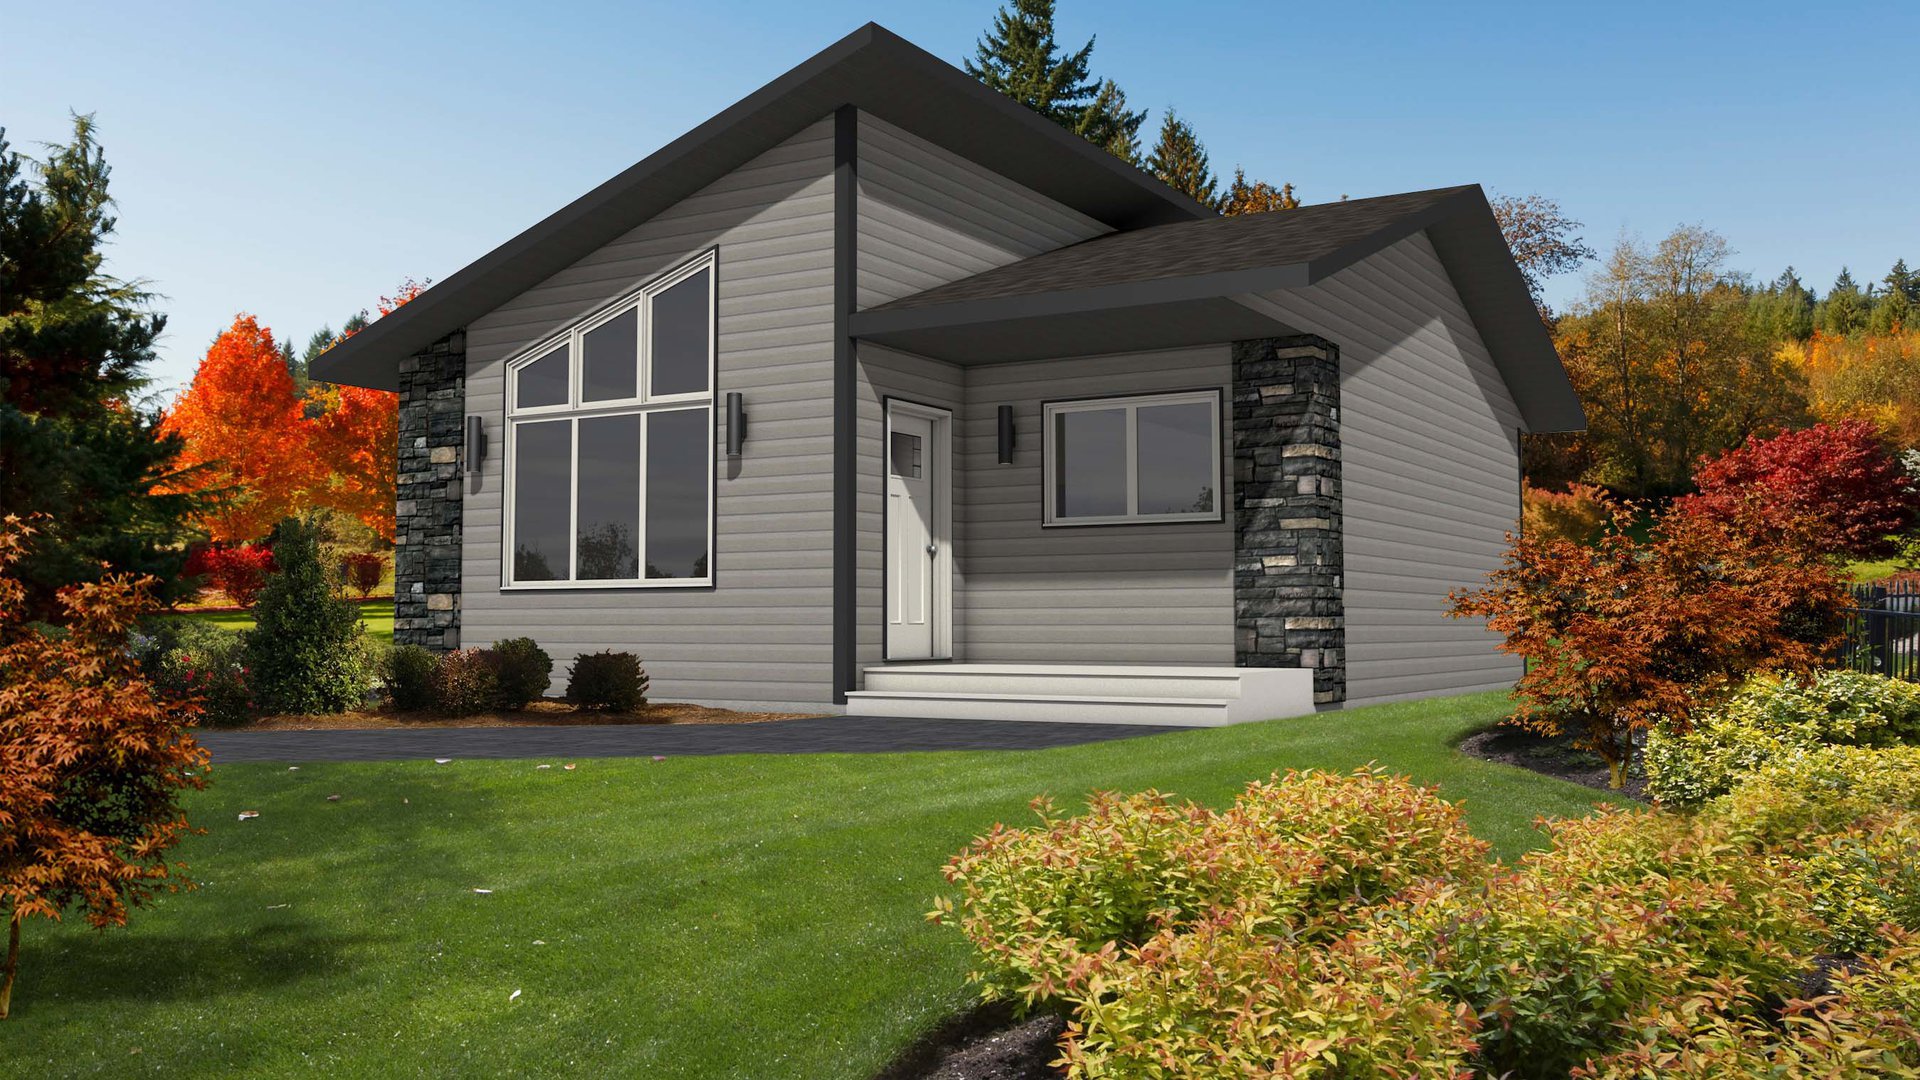 Mensa house plan modular homes nelson homes ready to move homes prefabricated home packages.jpg